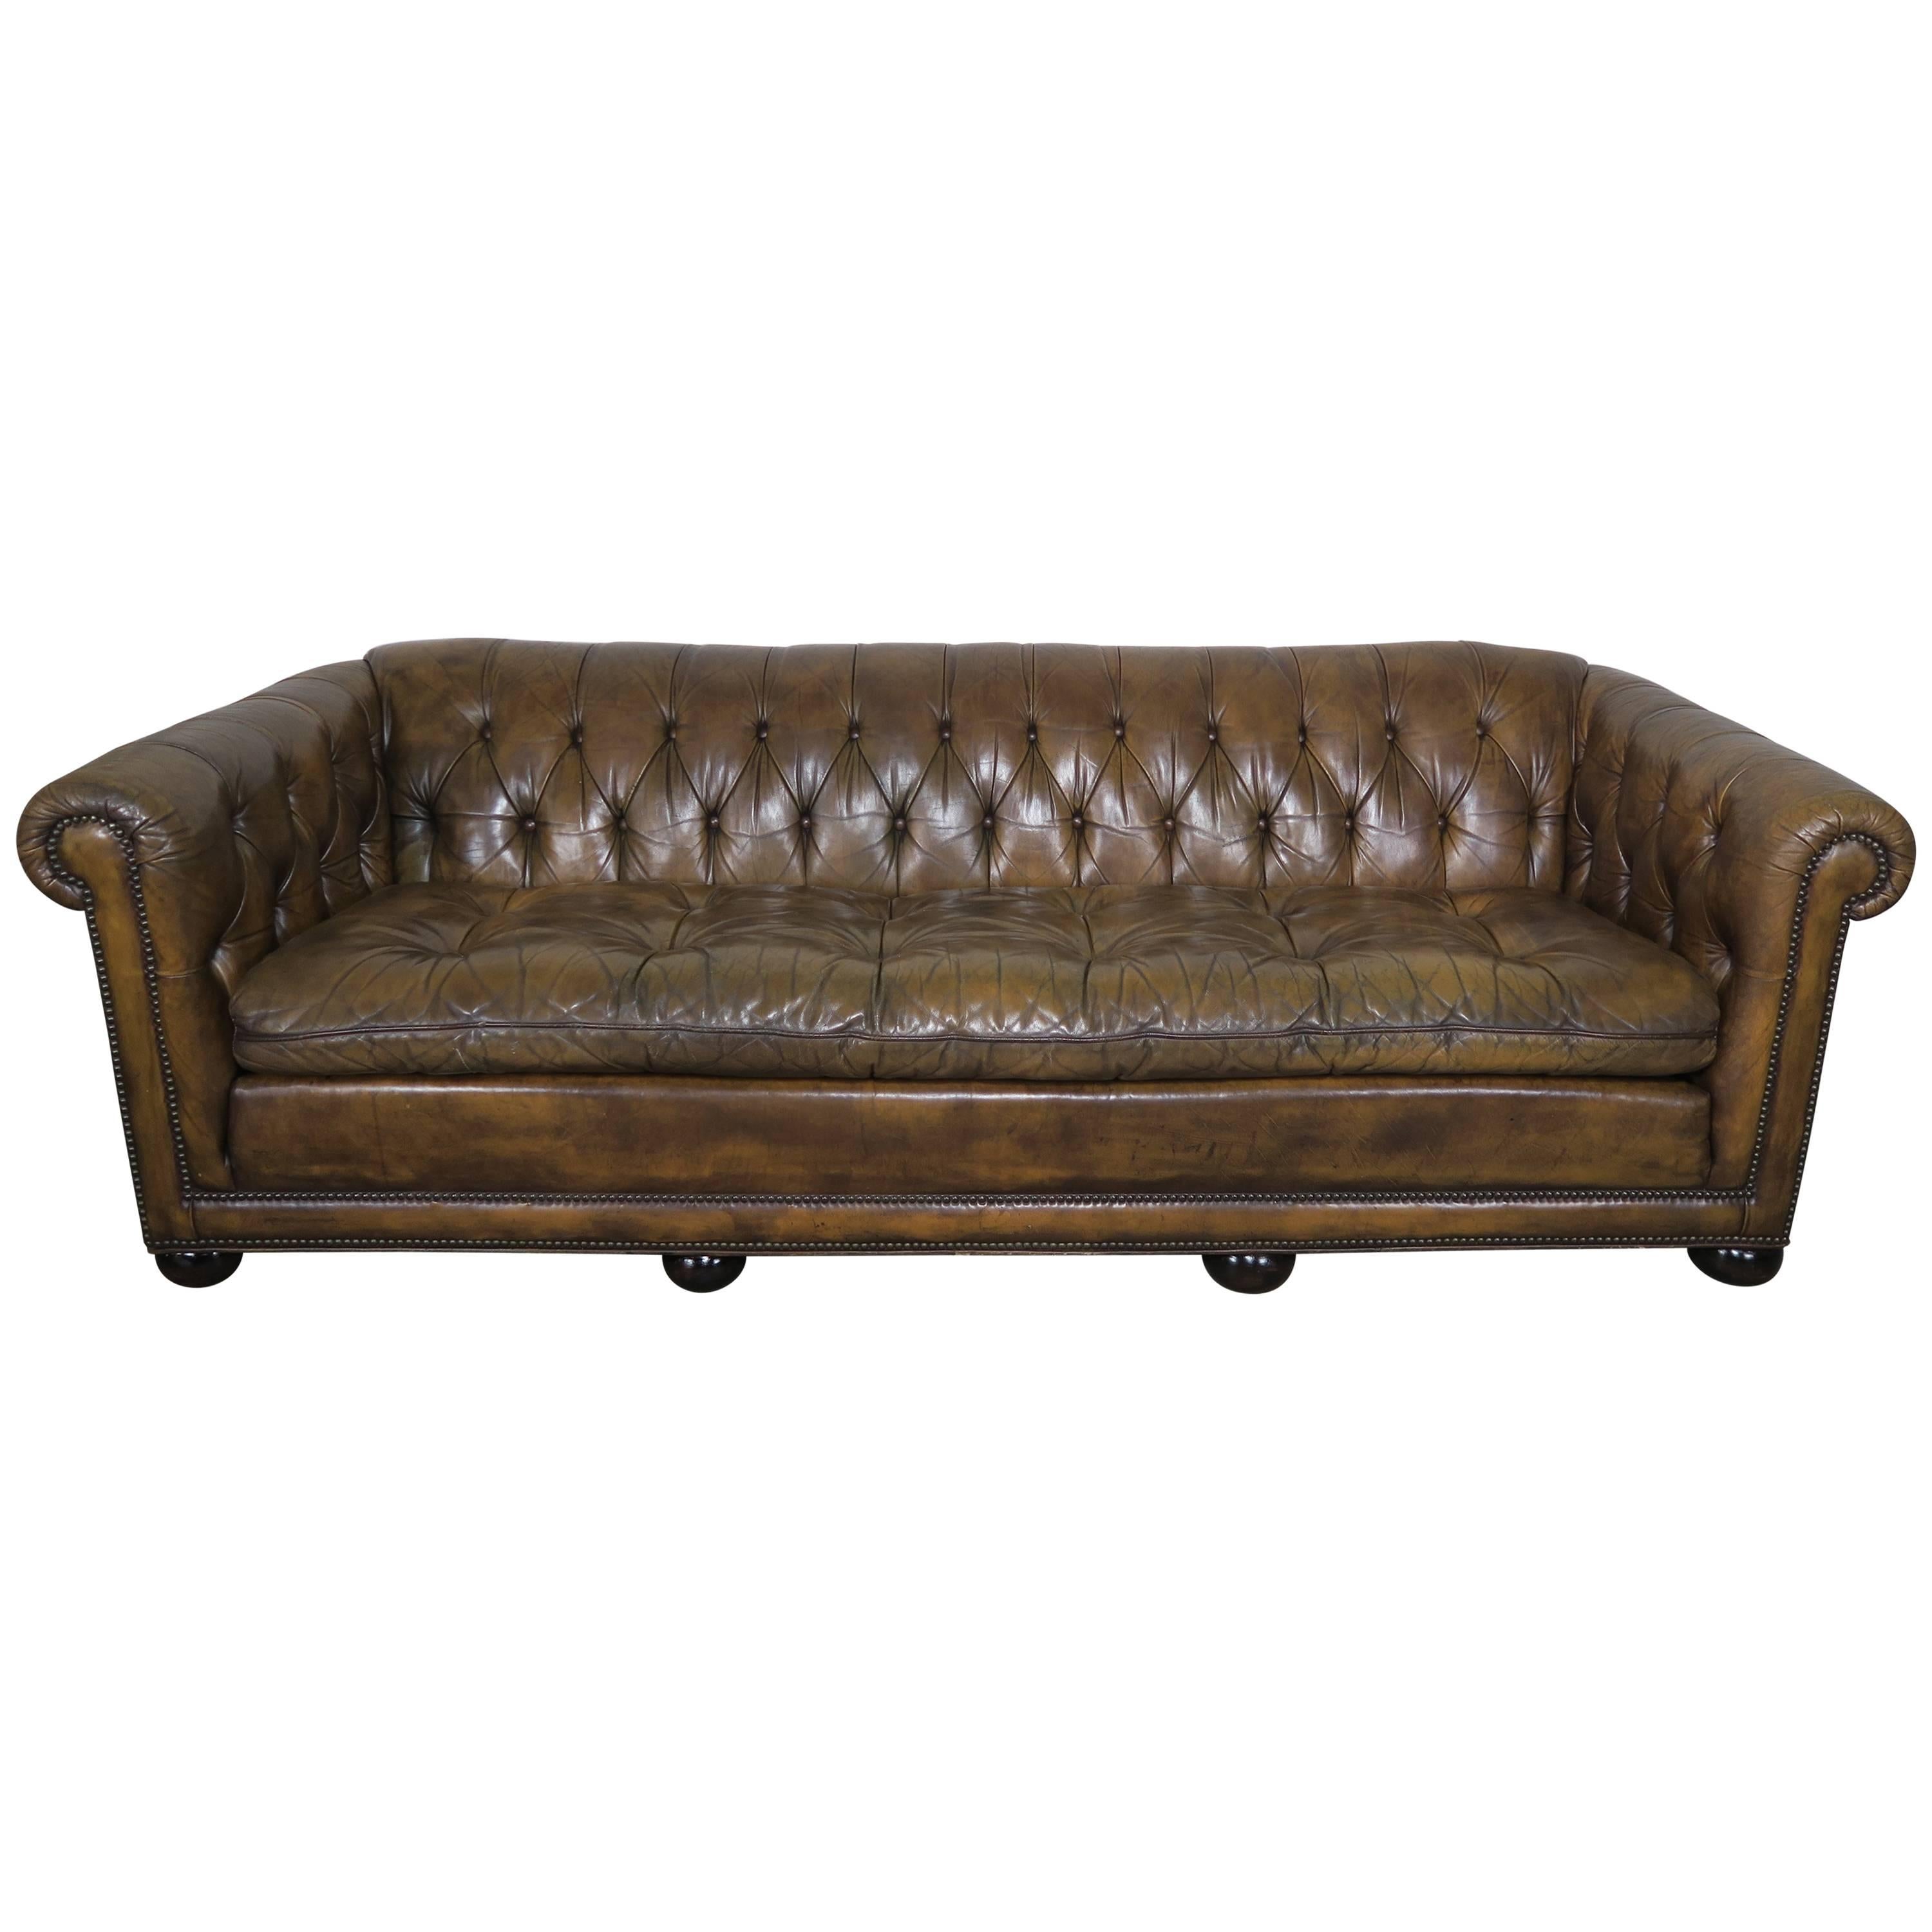 English Tufted Leather Chesterfield Style Sofa, 1930s